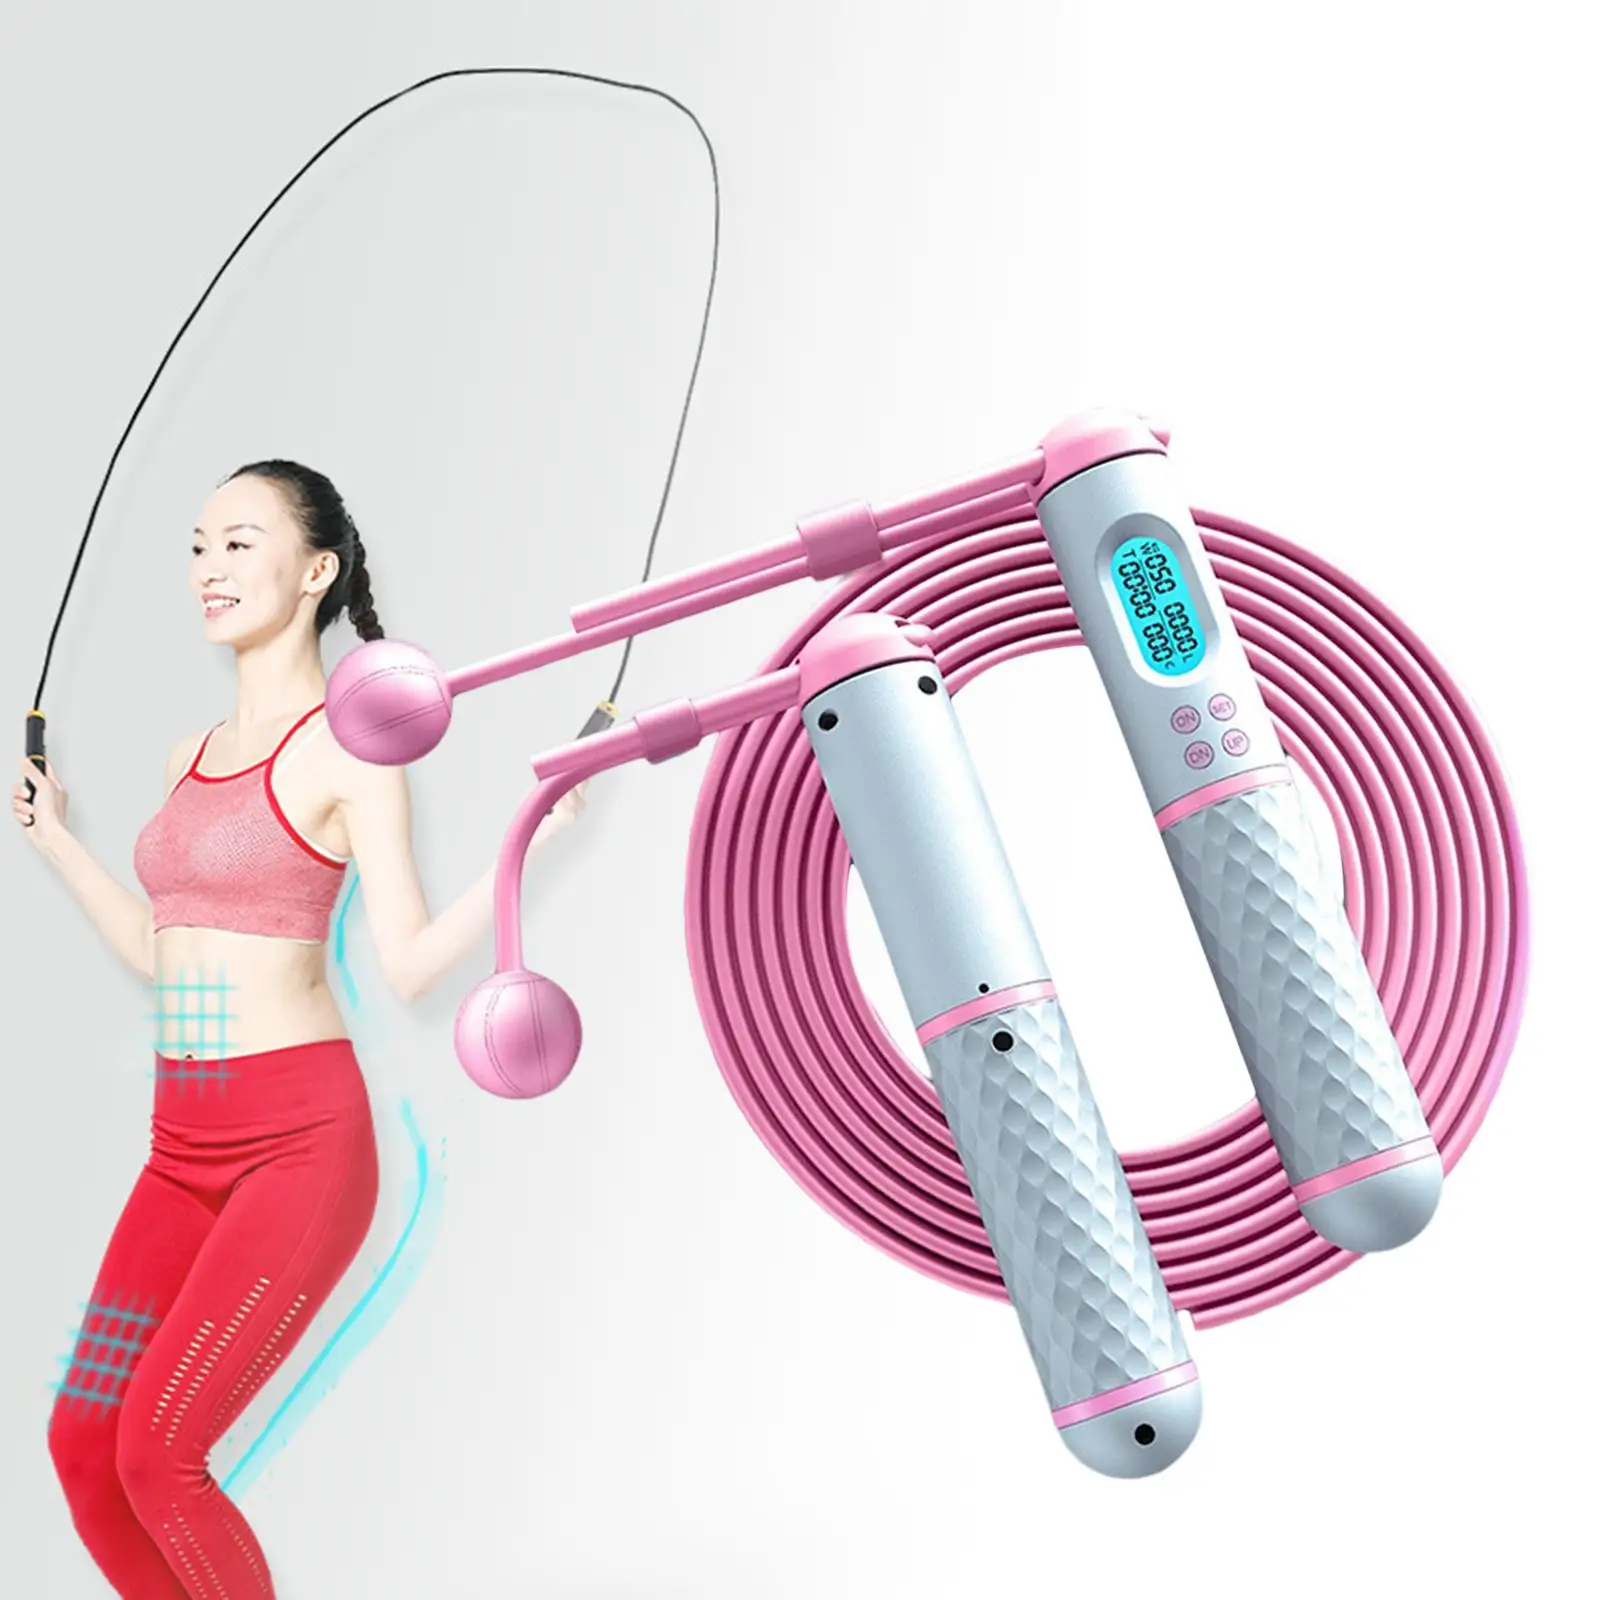 2 in 1 Skipping Rope with Counter with Adjustable Length Cordless Ball for Fitness Endurance Training Workout Exercise Women Men